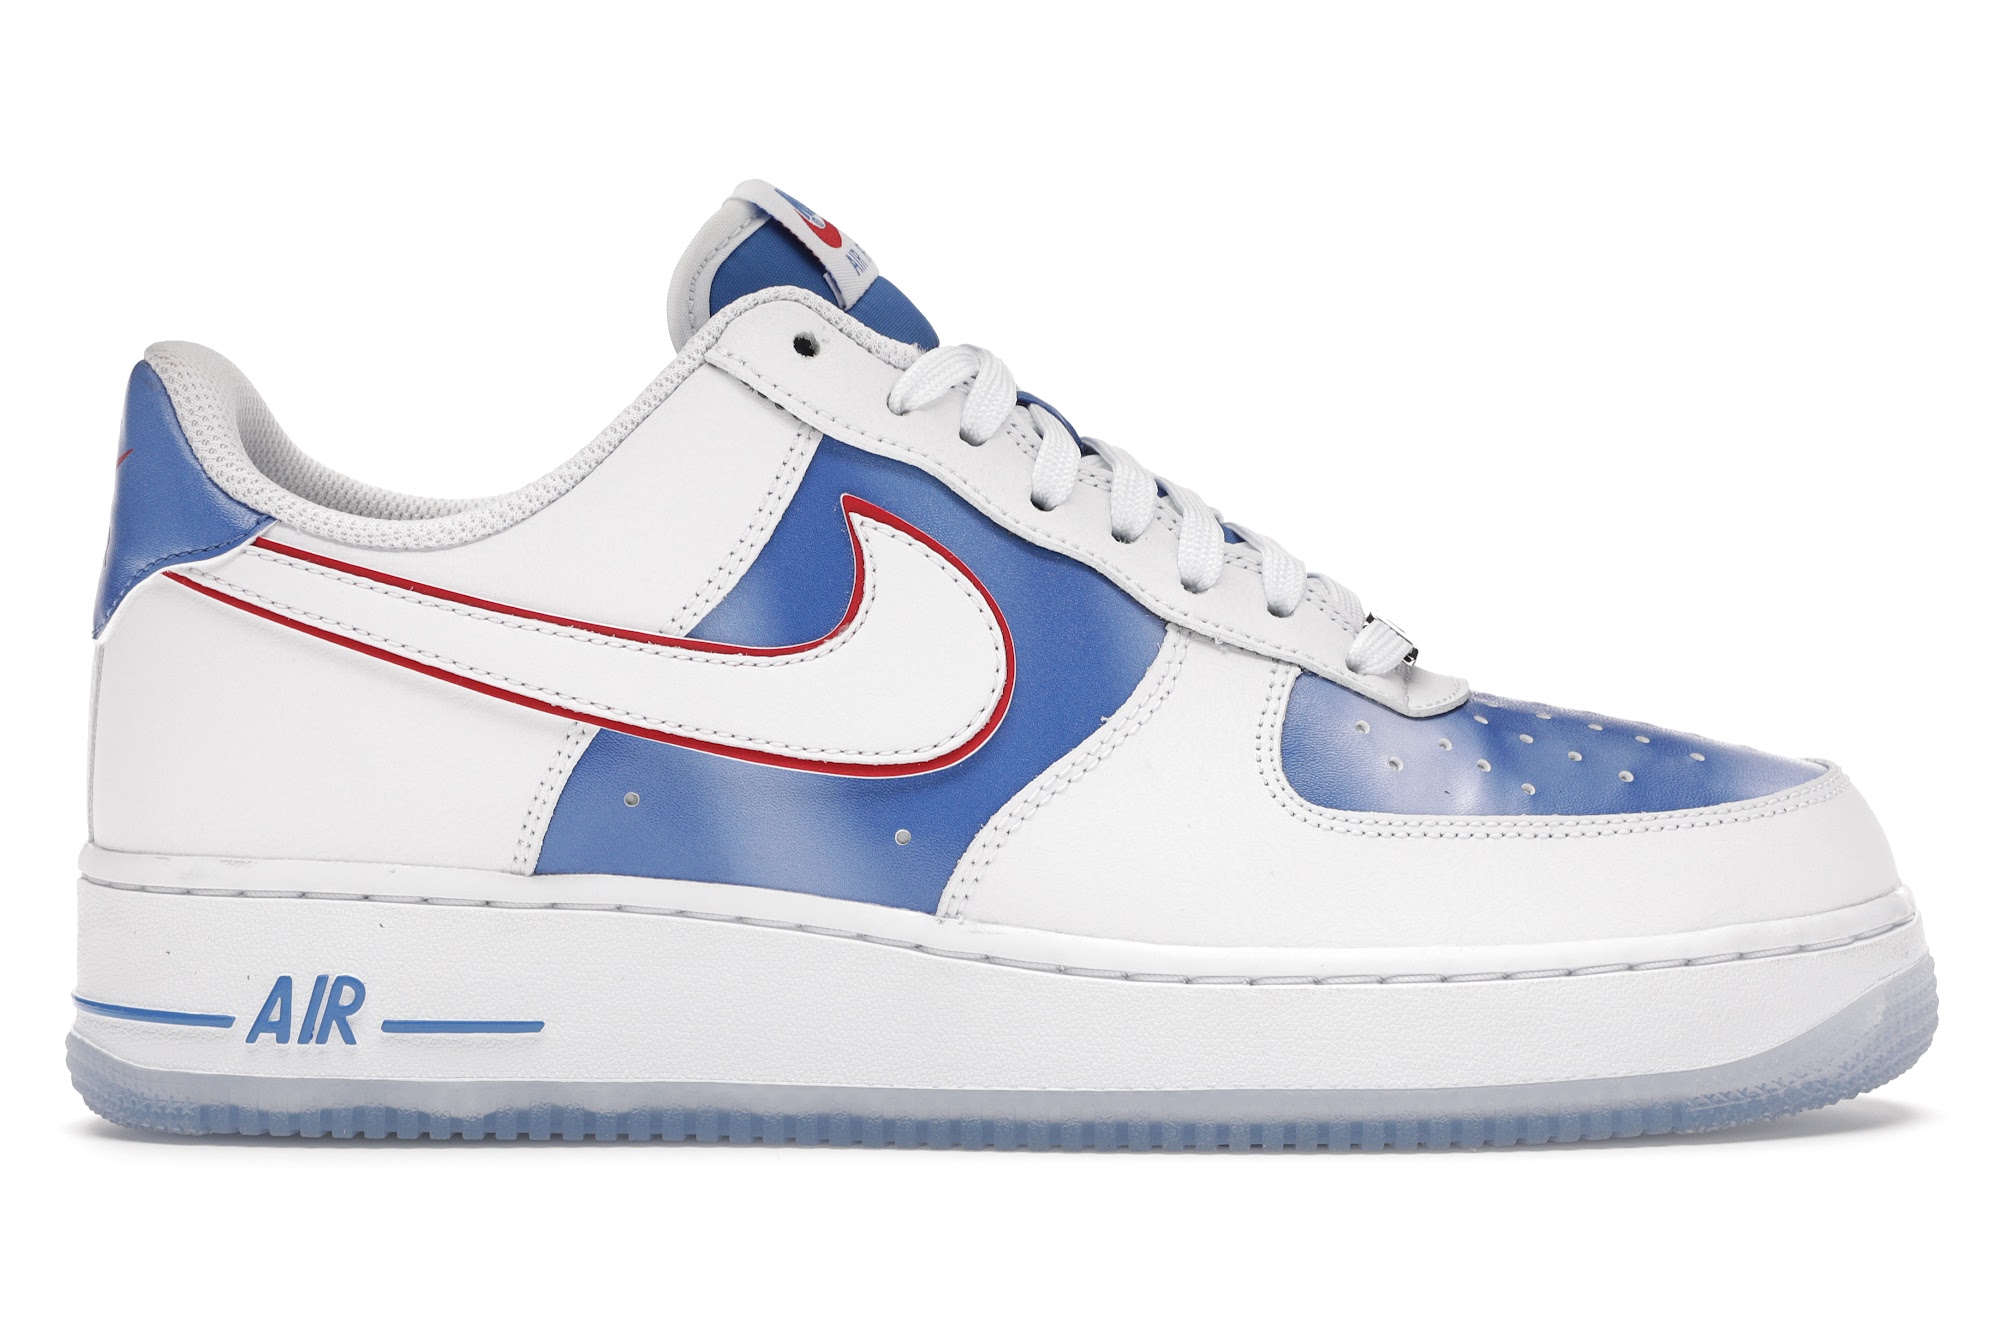 NIKE AIR FORCE 1 LOW PACIFIC BLUEスニーカー元箱はありません